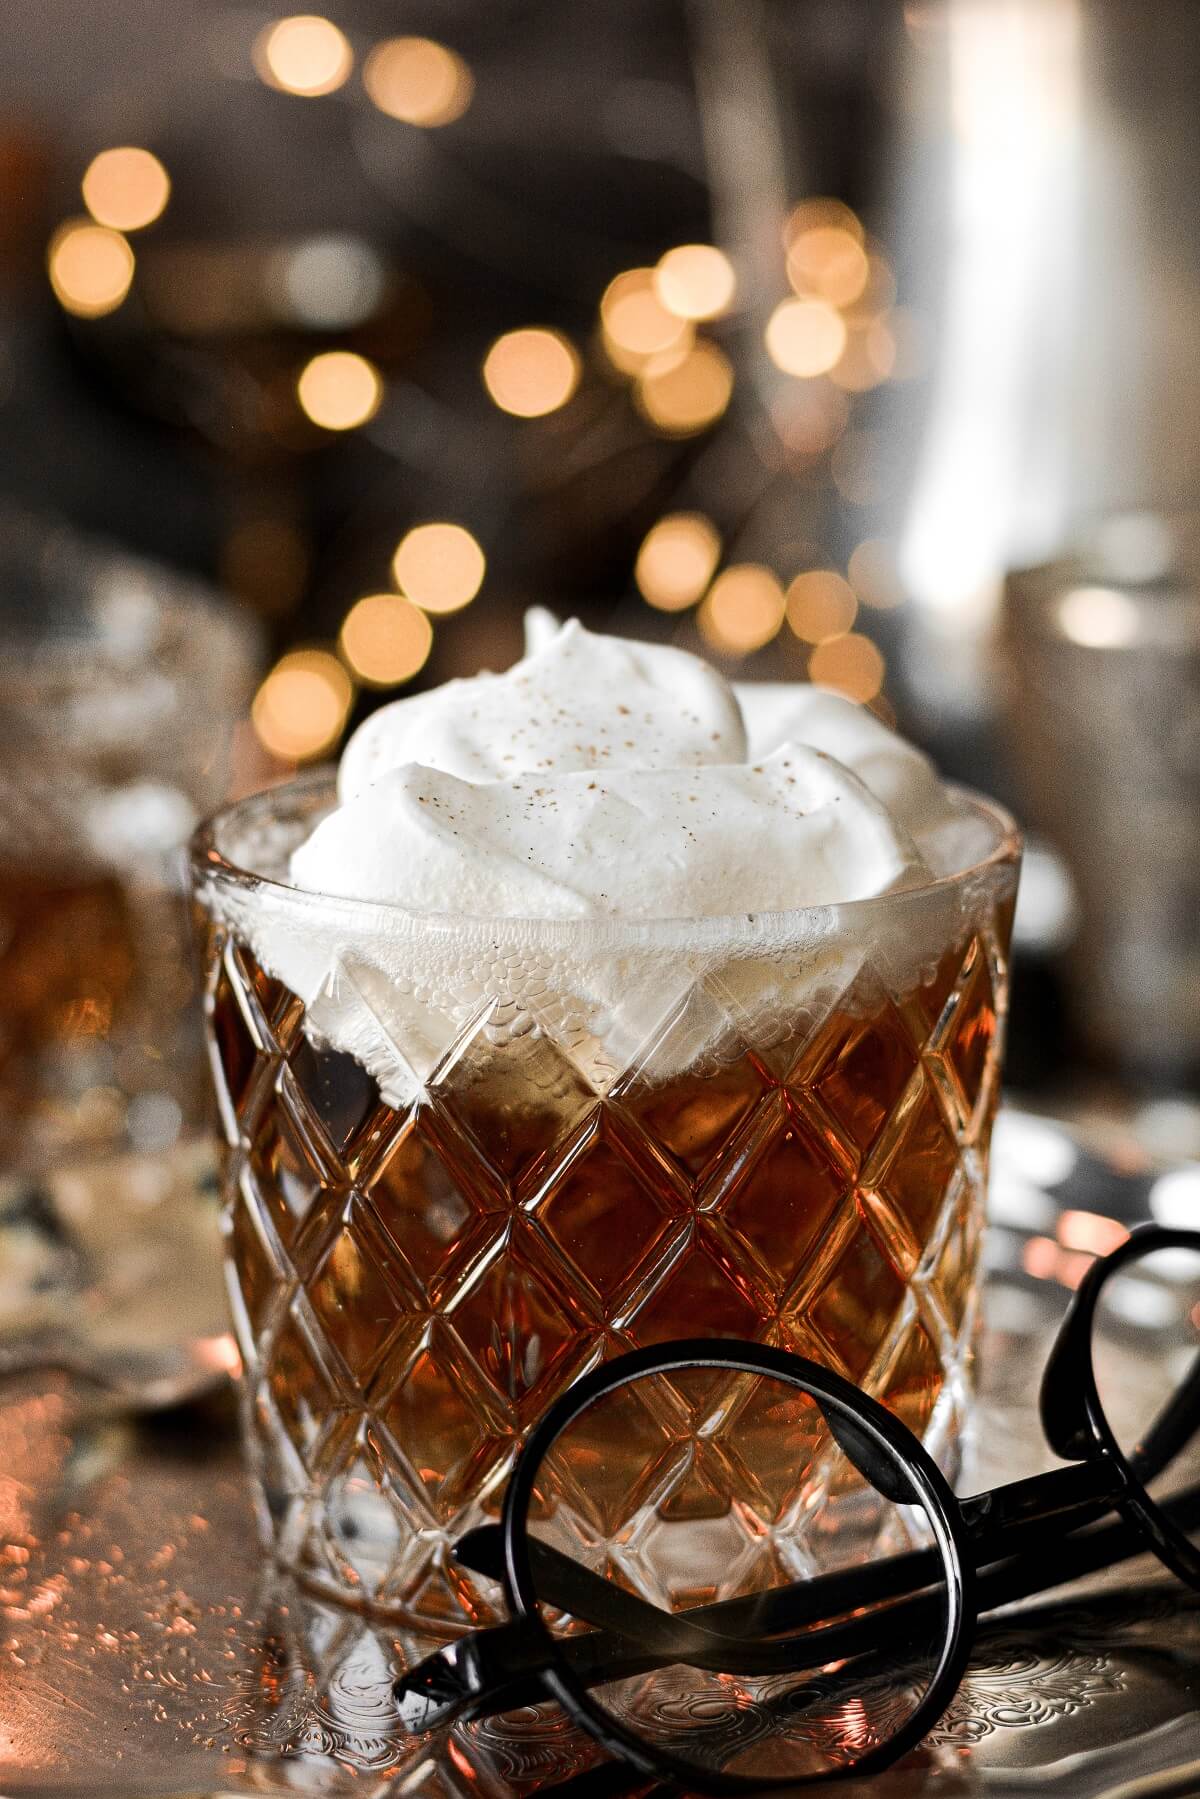 A glass of butter beer topped with whipped cream, with lights twinkling in the background.